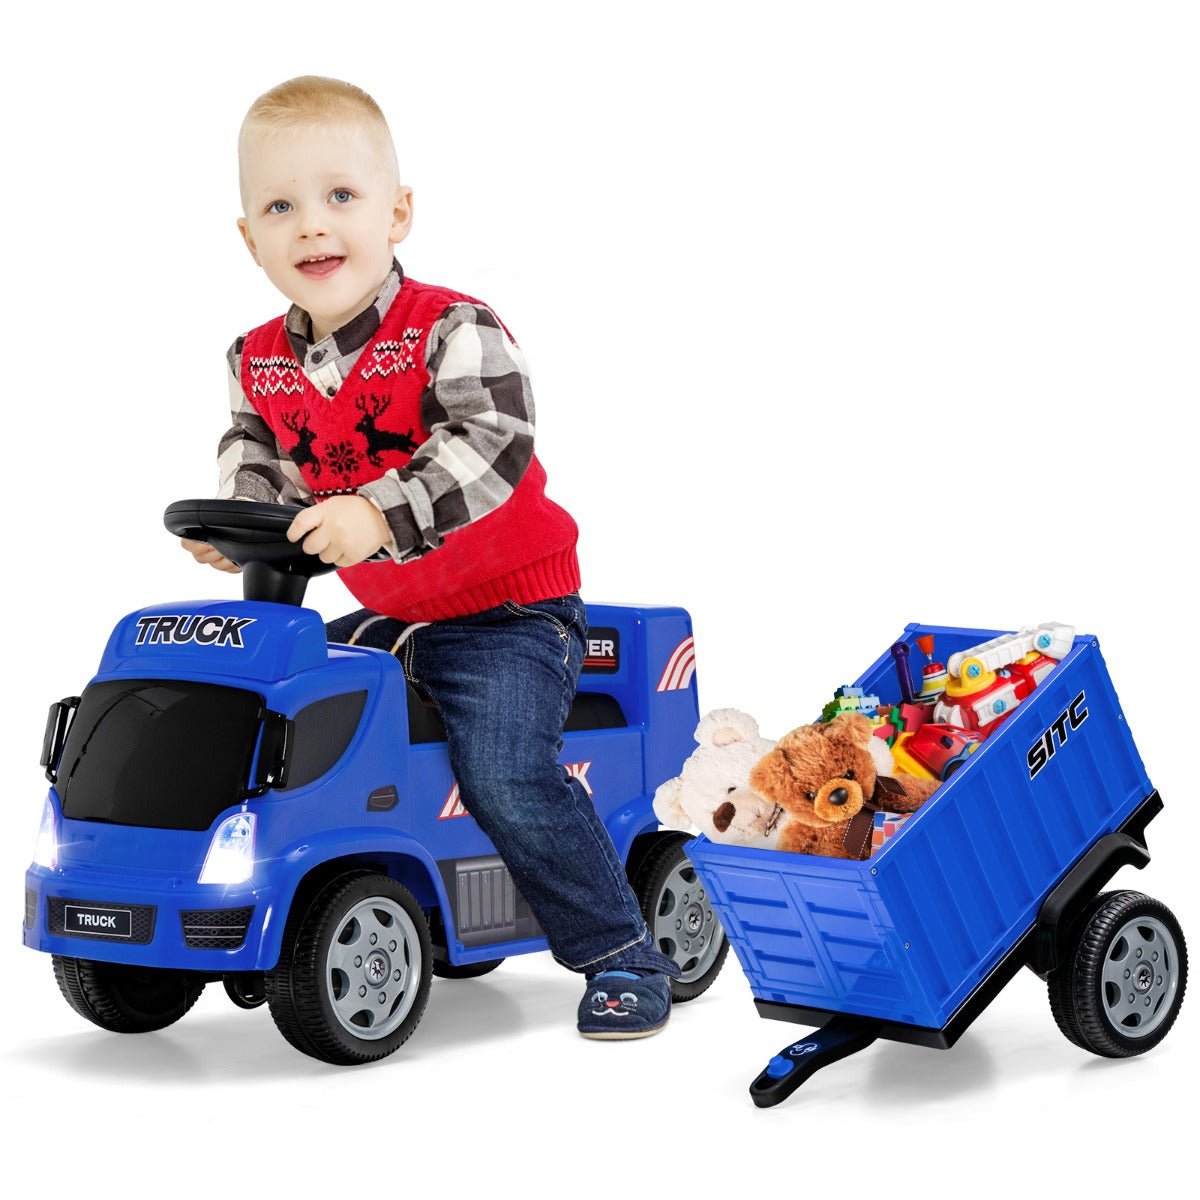 Buy a Fun and Functional Blue Ride On Truck in Australia